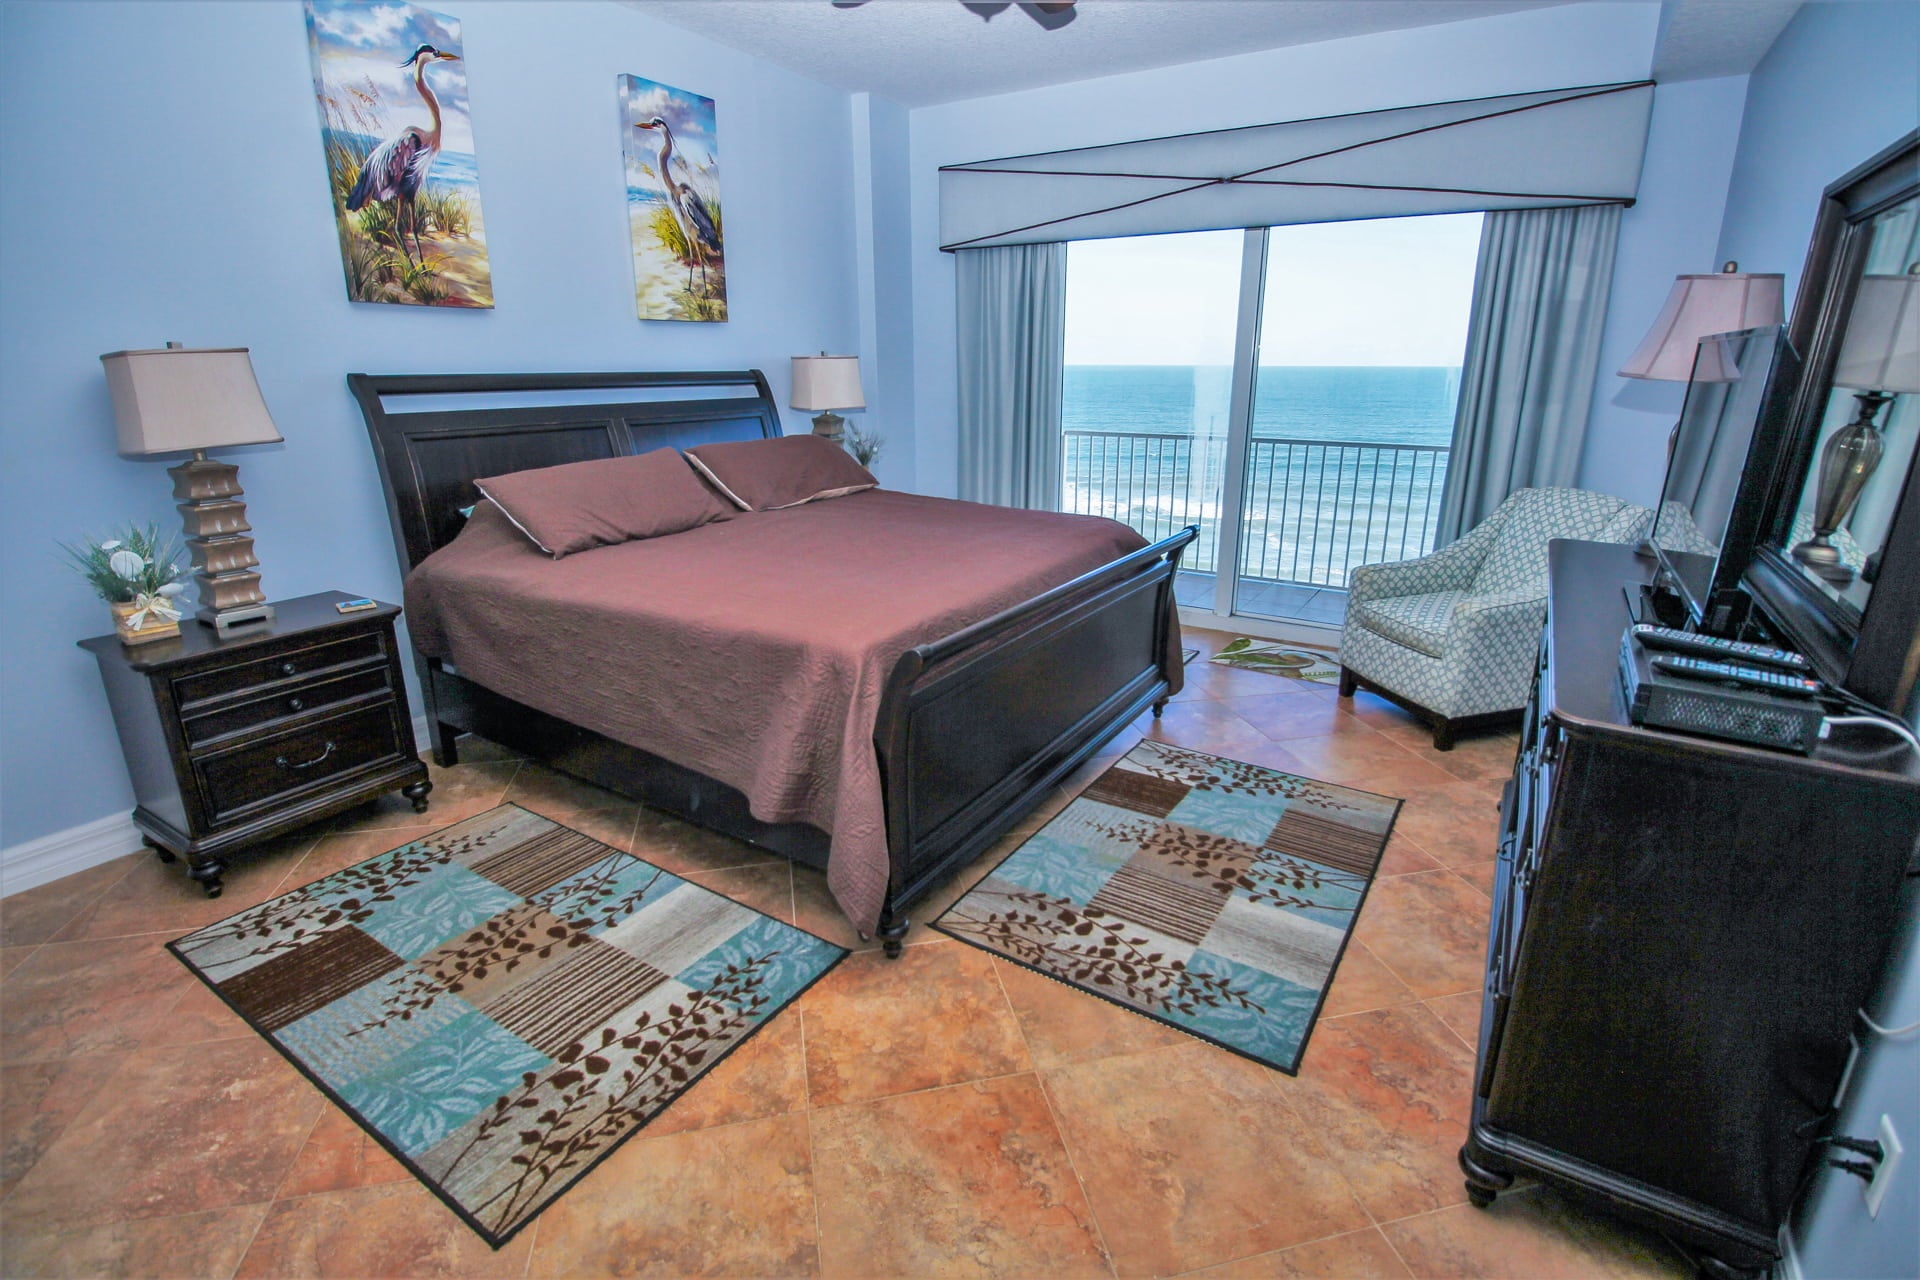 Primary Bedroom with Ocean View